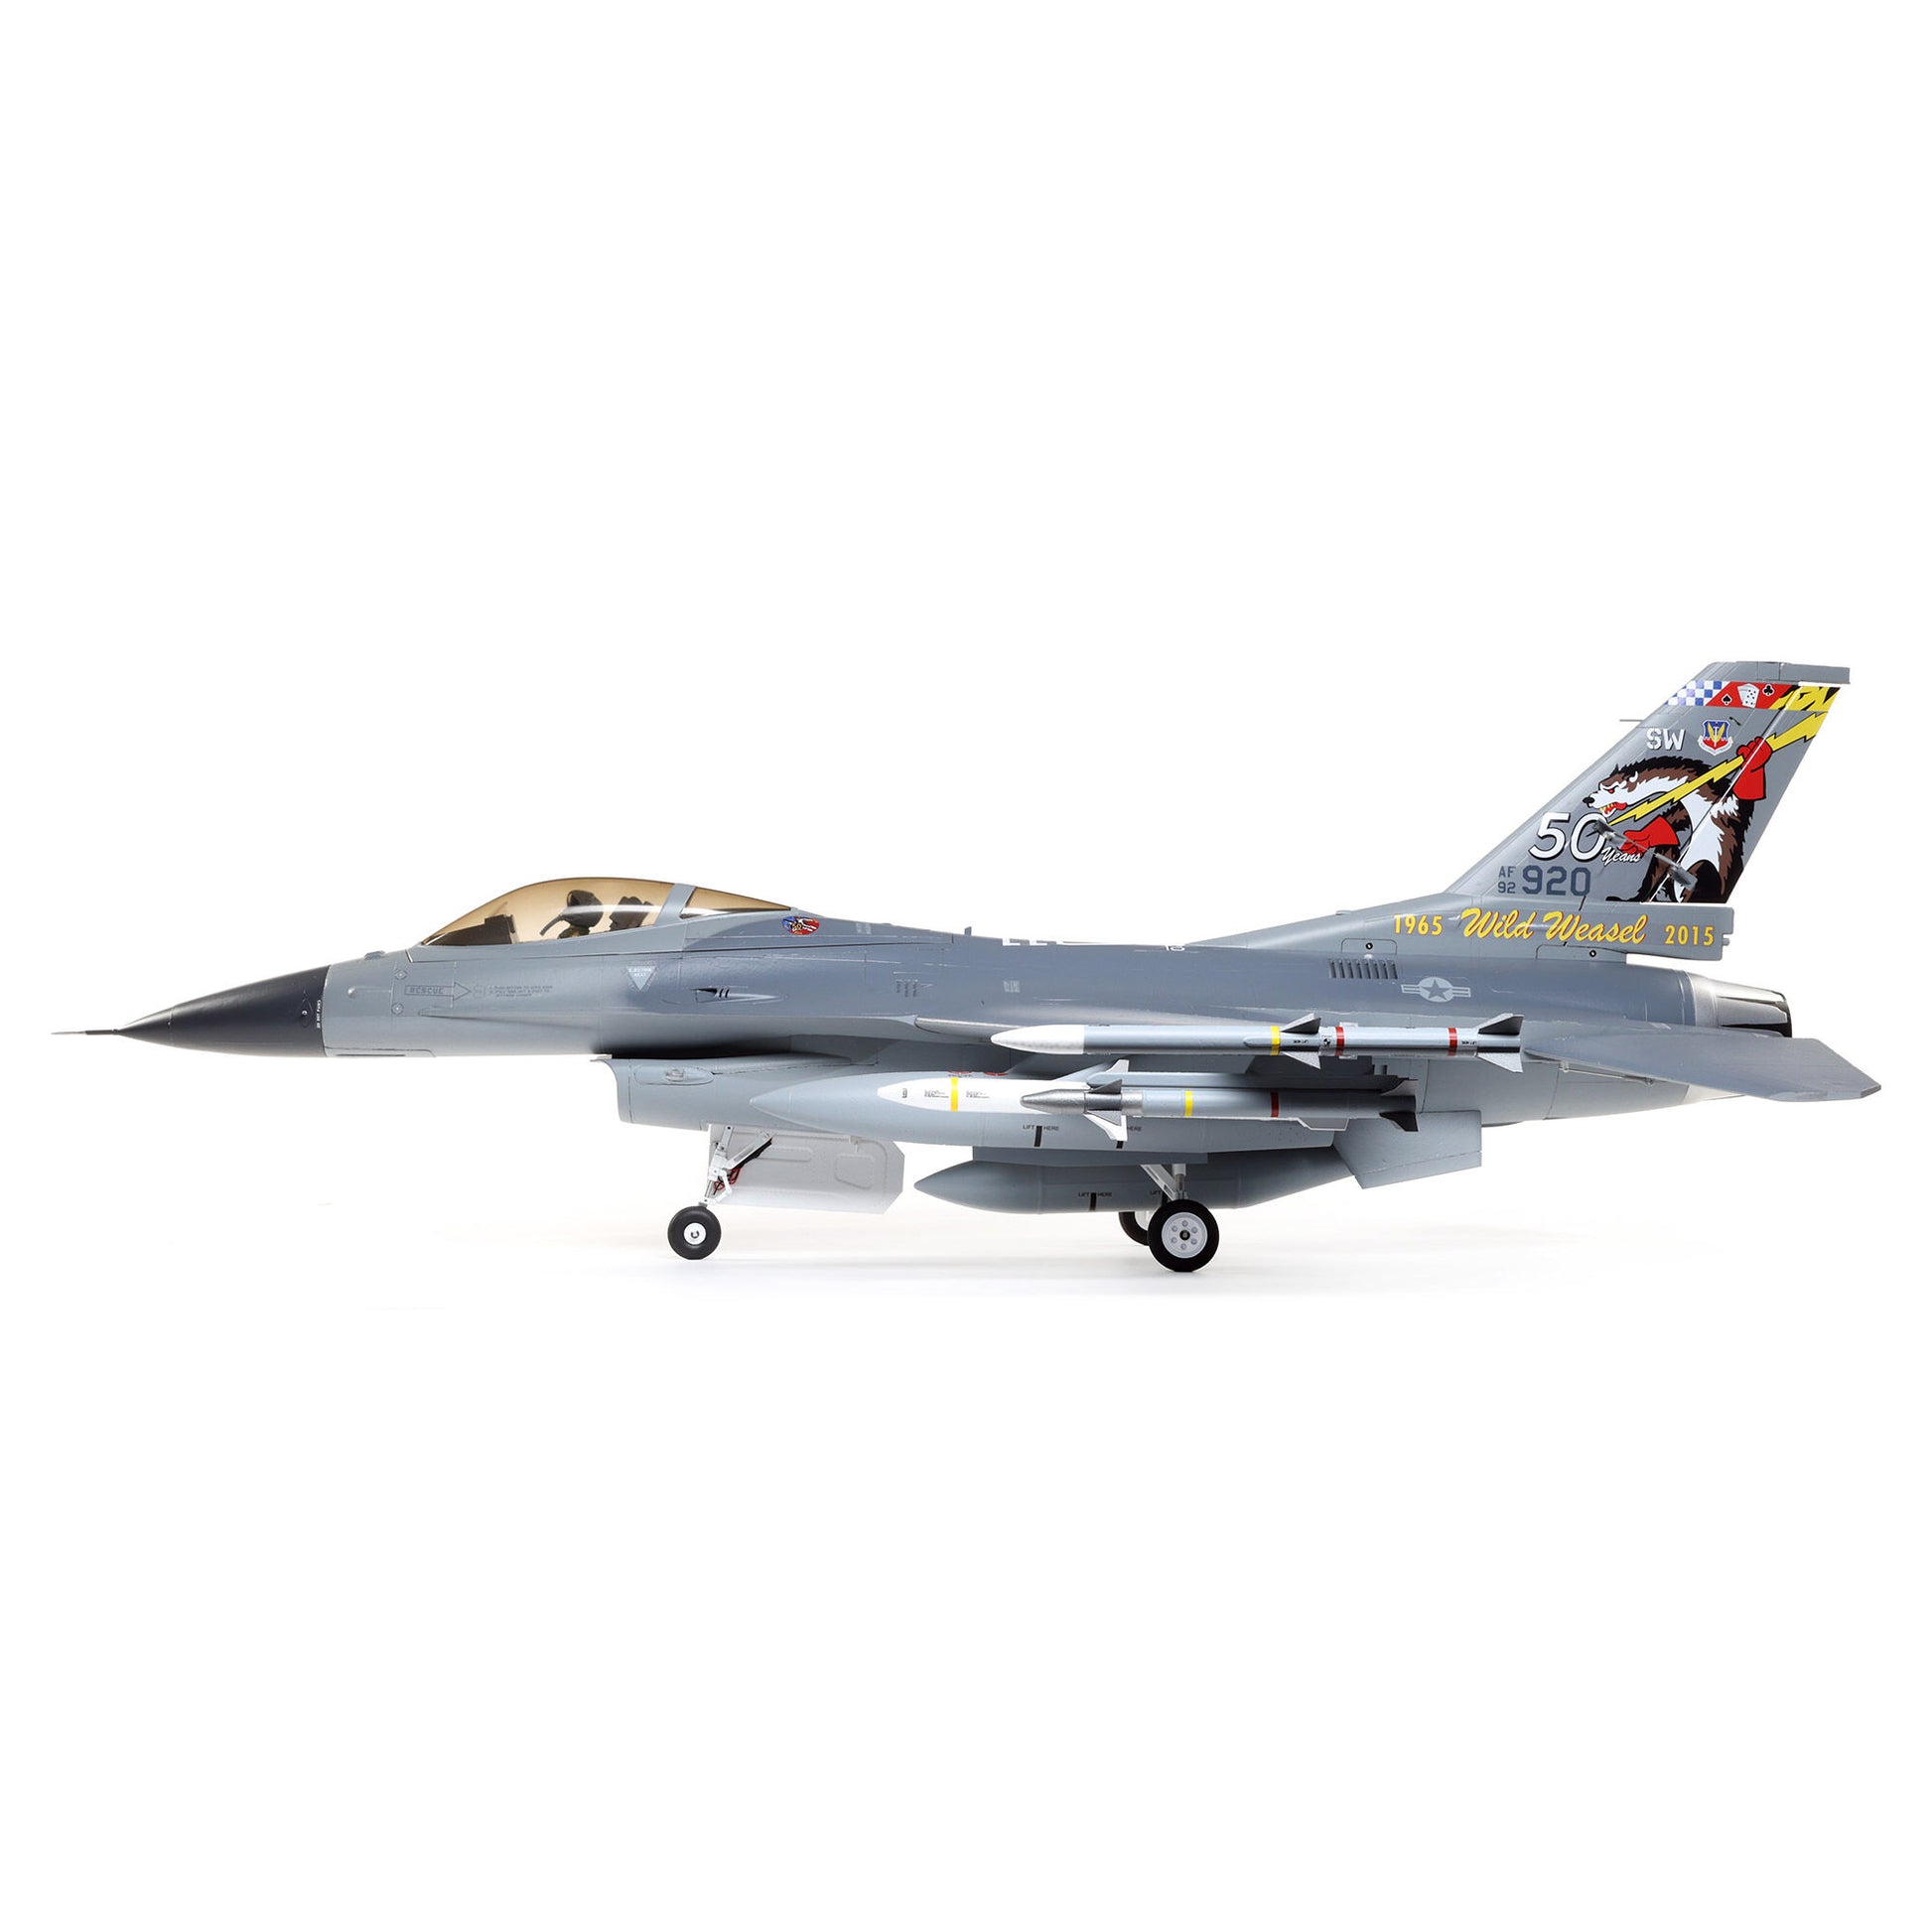 E-flite F-16 Falcon 80mm EDF Jet Smart BNF Basic with SAFE Select, 1000mm EFL87850